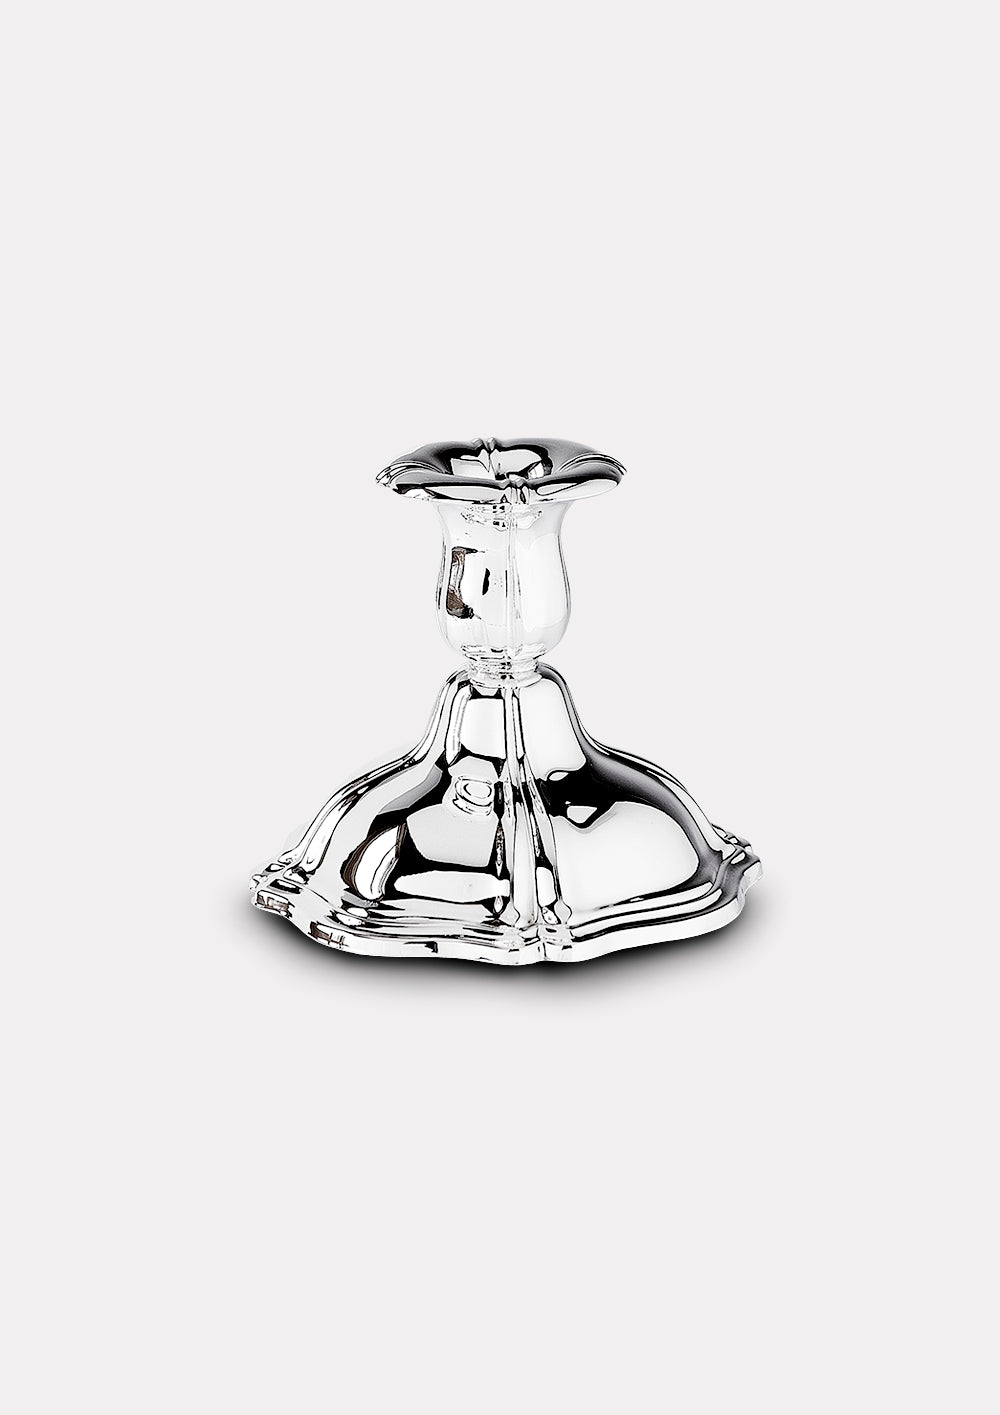 Candlestick in silver